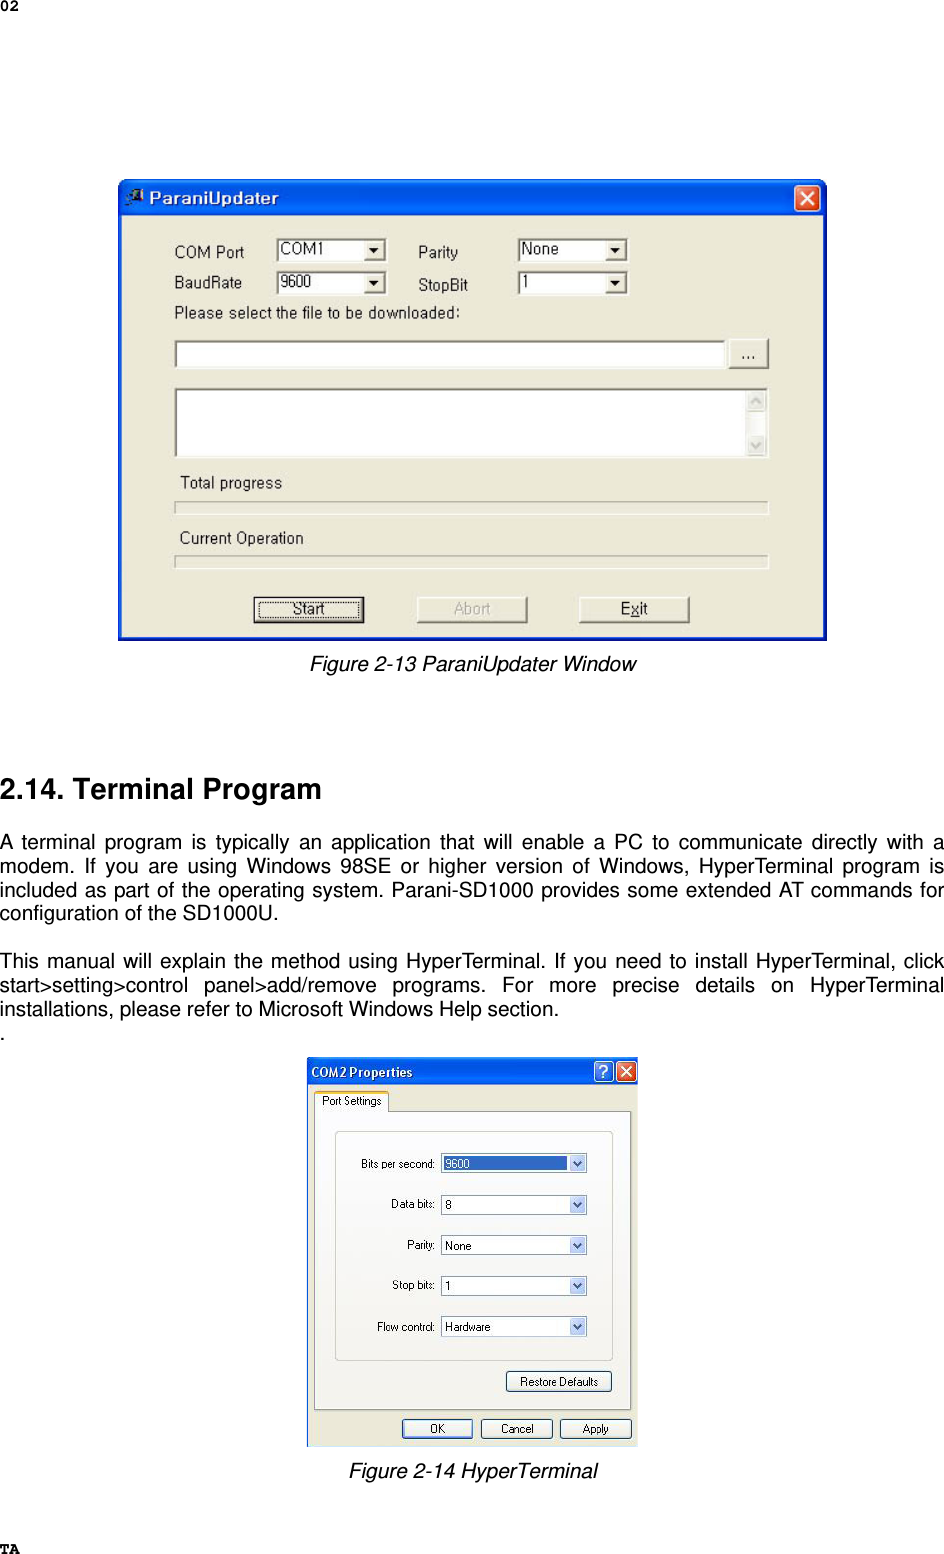 02 TA    Figure 2-13 ParaniUpdater Window     2.14. Terminal Program  A terminal program is typically an application that will enable a PC to communicate directly with a modem. If you are using Windows 98SE or higher version of Windows, HyperTerminal program is included as part of the operating system. Parani-SD1000 provides some extended AT commands for configuration of the SD1000U.    This manual will explain the method using HyperTerminal. If you need to install HyperTerminal, click start&gt;setting&gt;control panel&gt;add/remove programs. For more precise details on HyperTerminal installations, please refer to Microsoft Windows Help section. .  Figure 2-14 HyperTerminal 